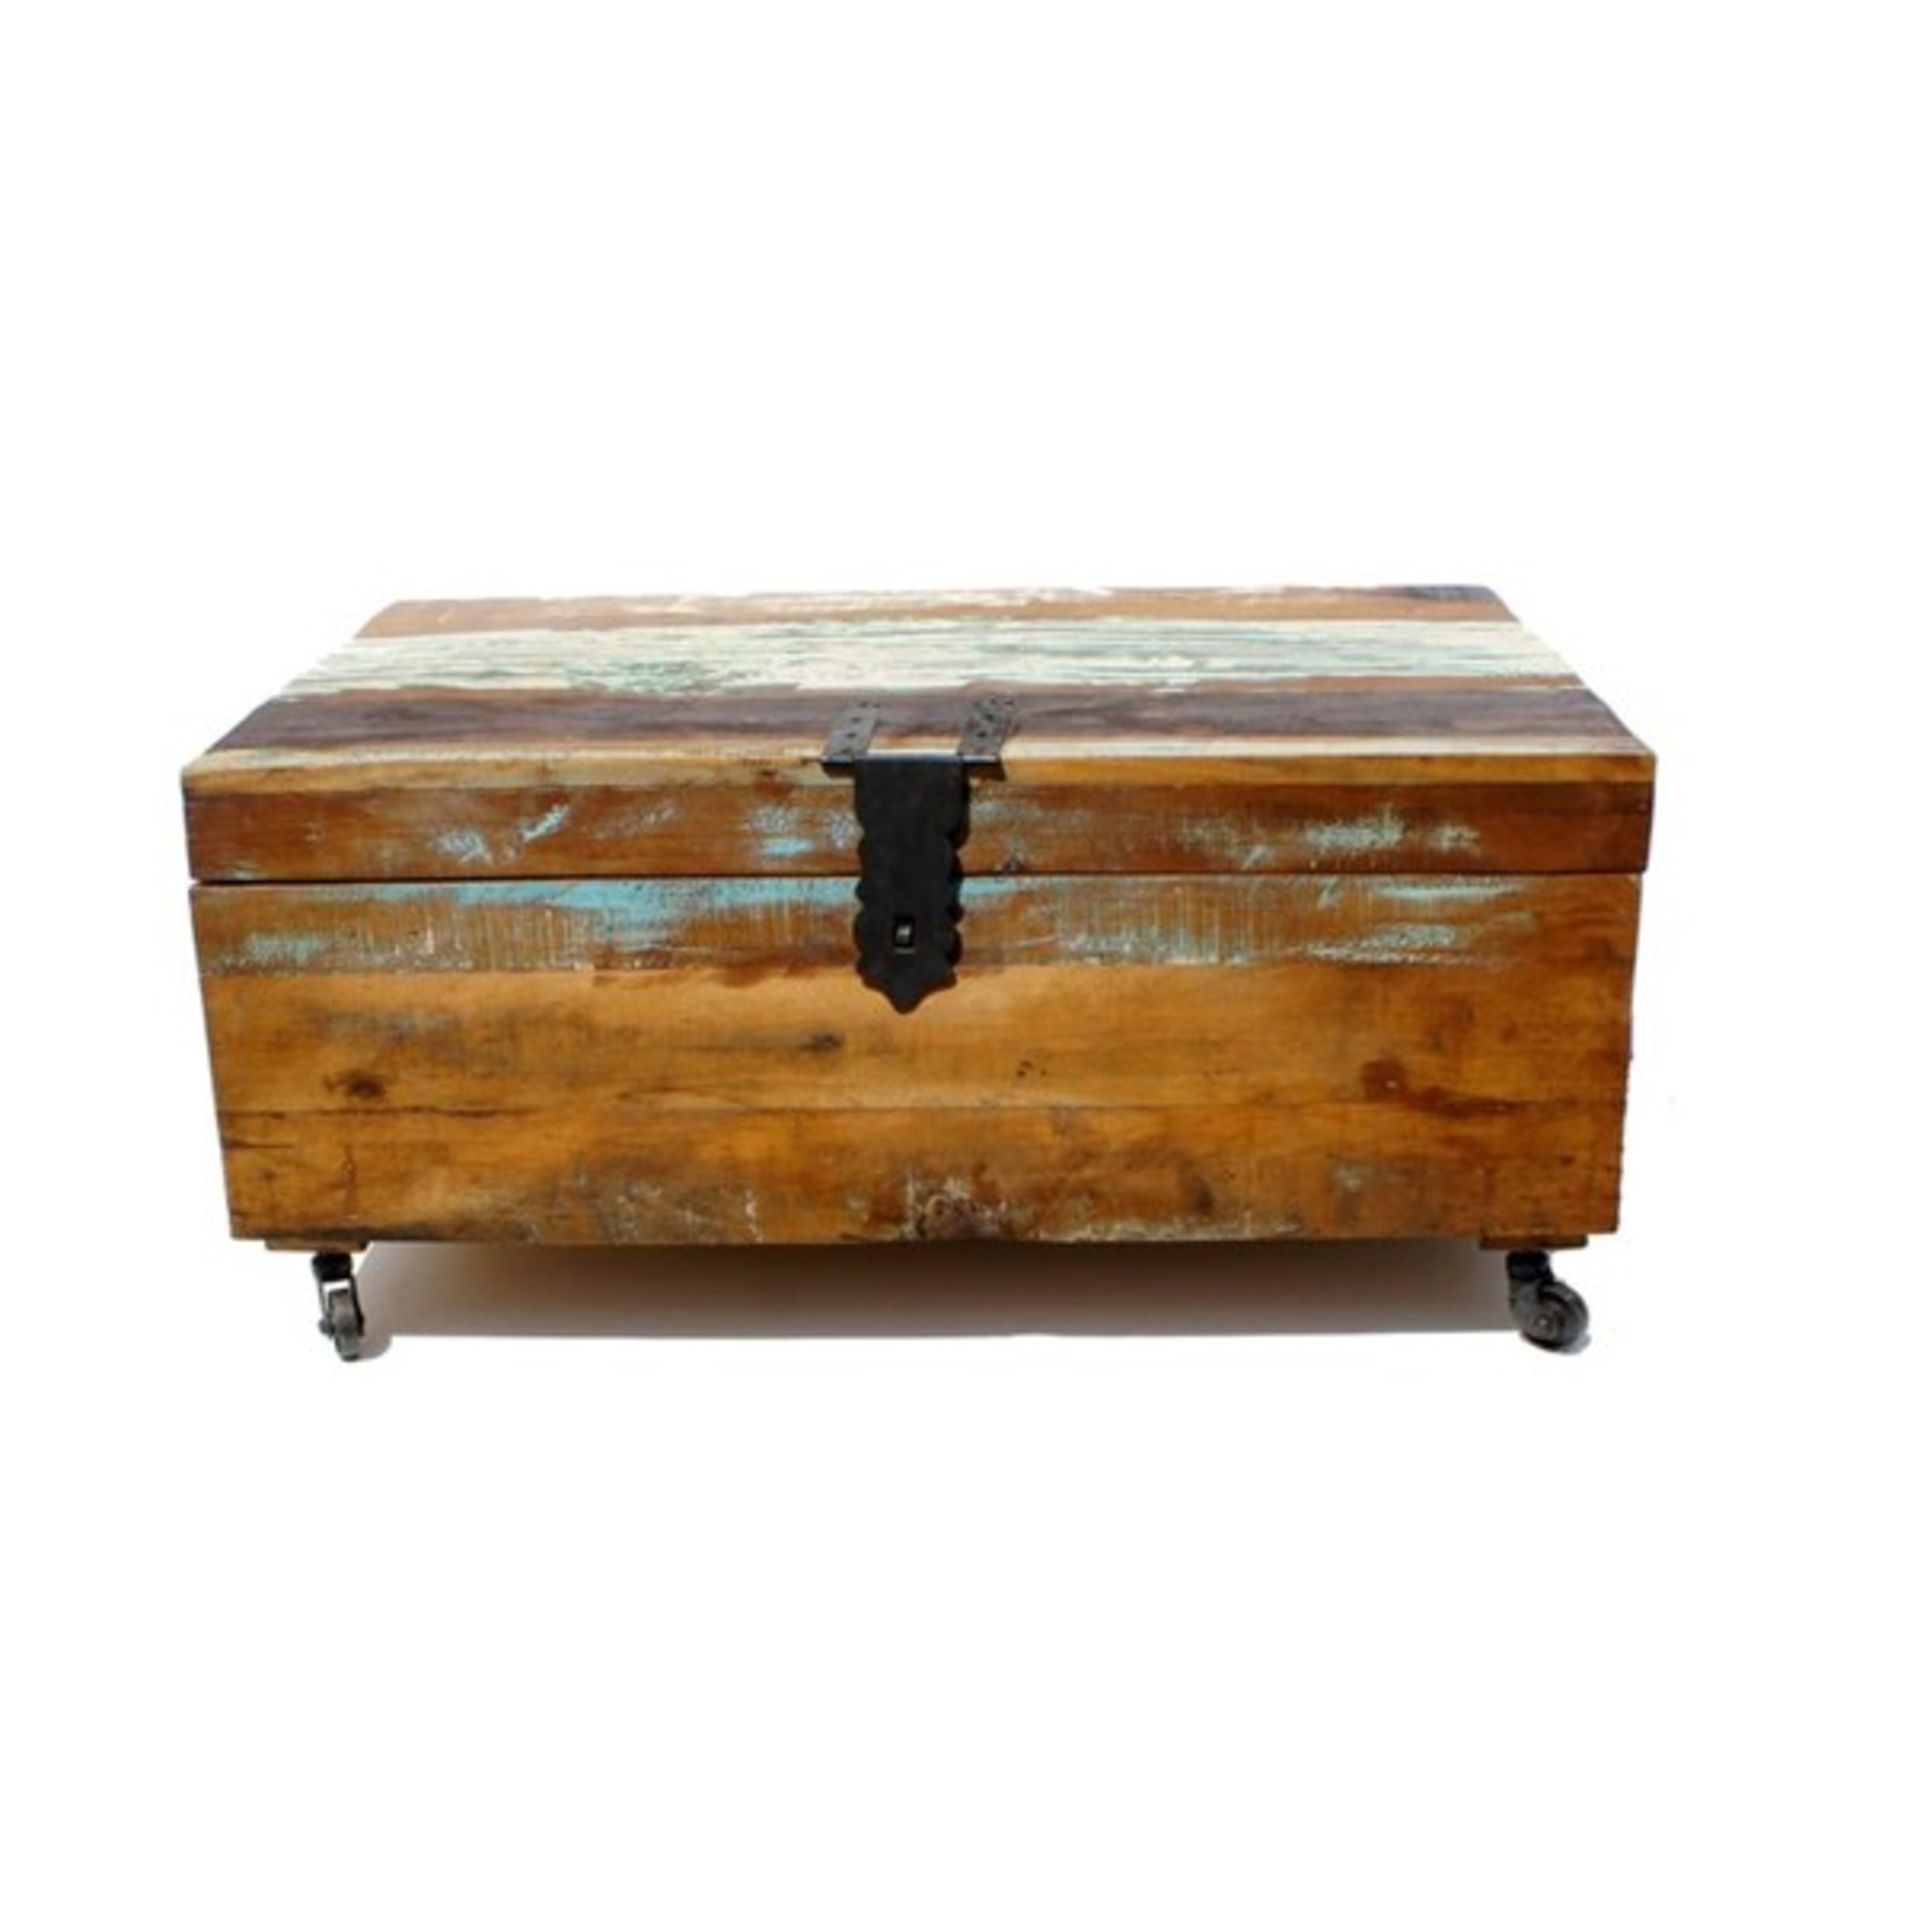 RRP £499 - Sanjay Old Distressed Painted Teak Trunk - 90 x 60 cm D x 40cm H SMALL CRACK, COLLECTION - Image 3 of 4